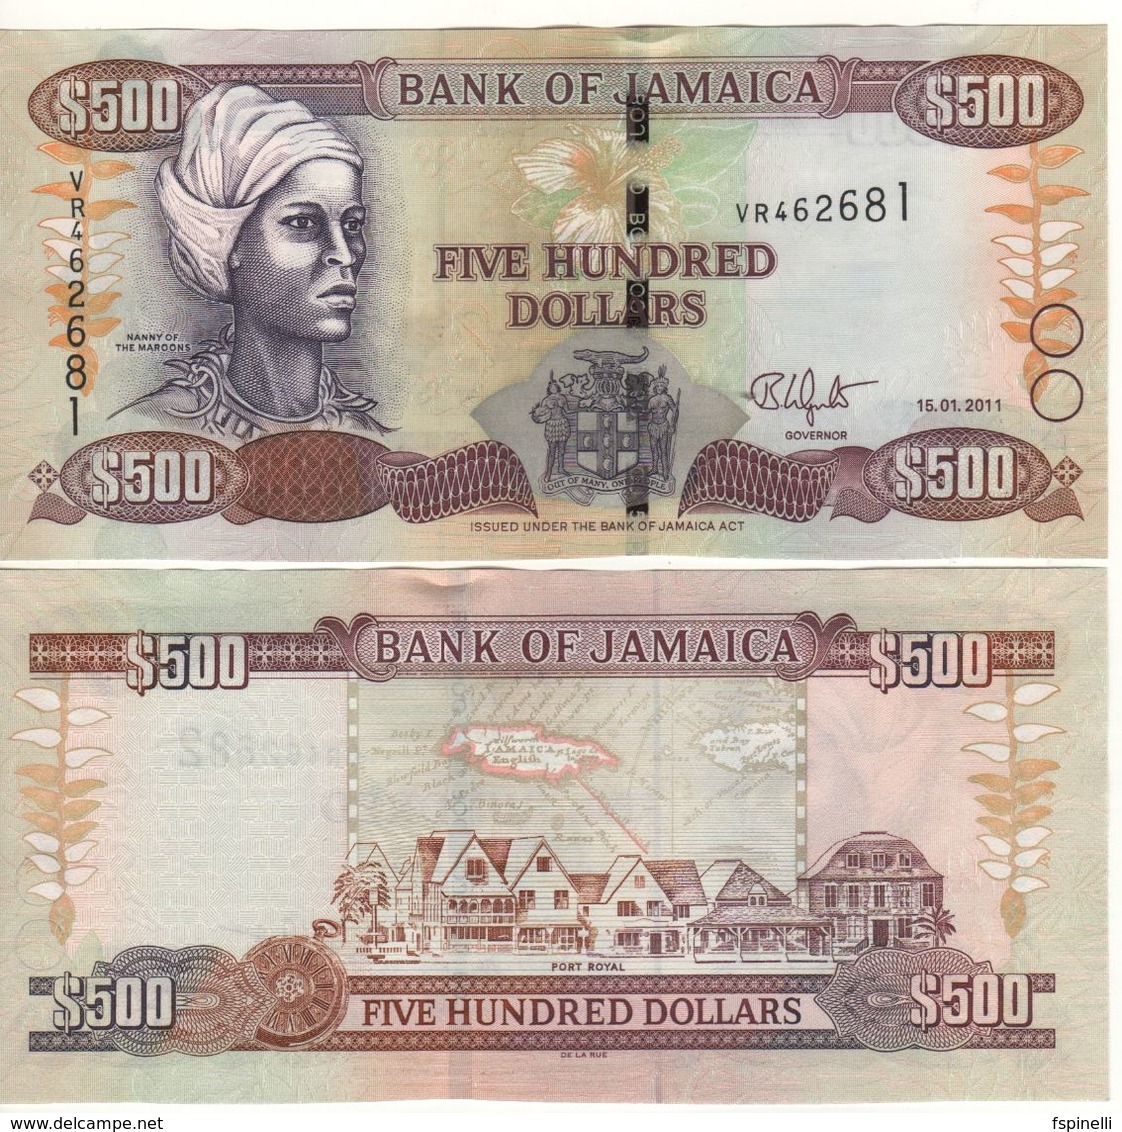 JAMAICA  500 Dollars  P85h  Dated 15.01.2011  ( Nanny Of The Maroons - Port Royal )   UNC - Jamaique